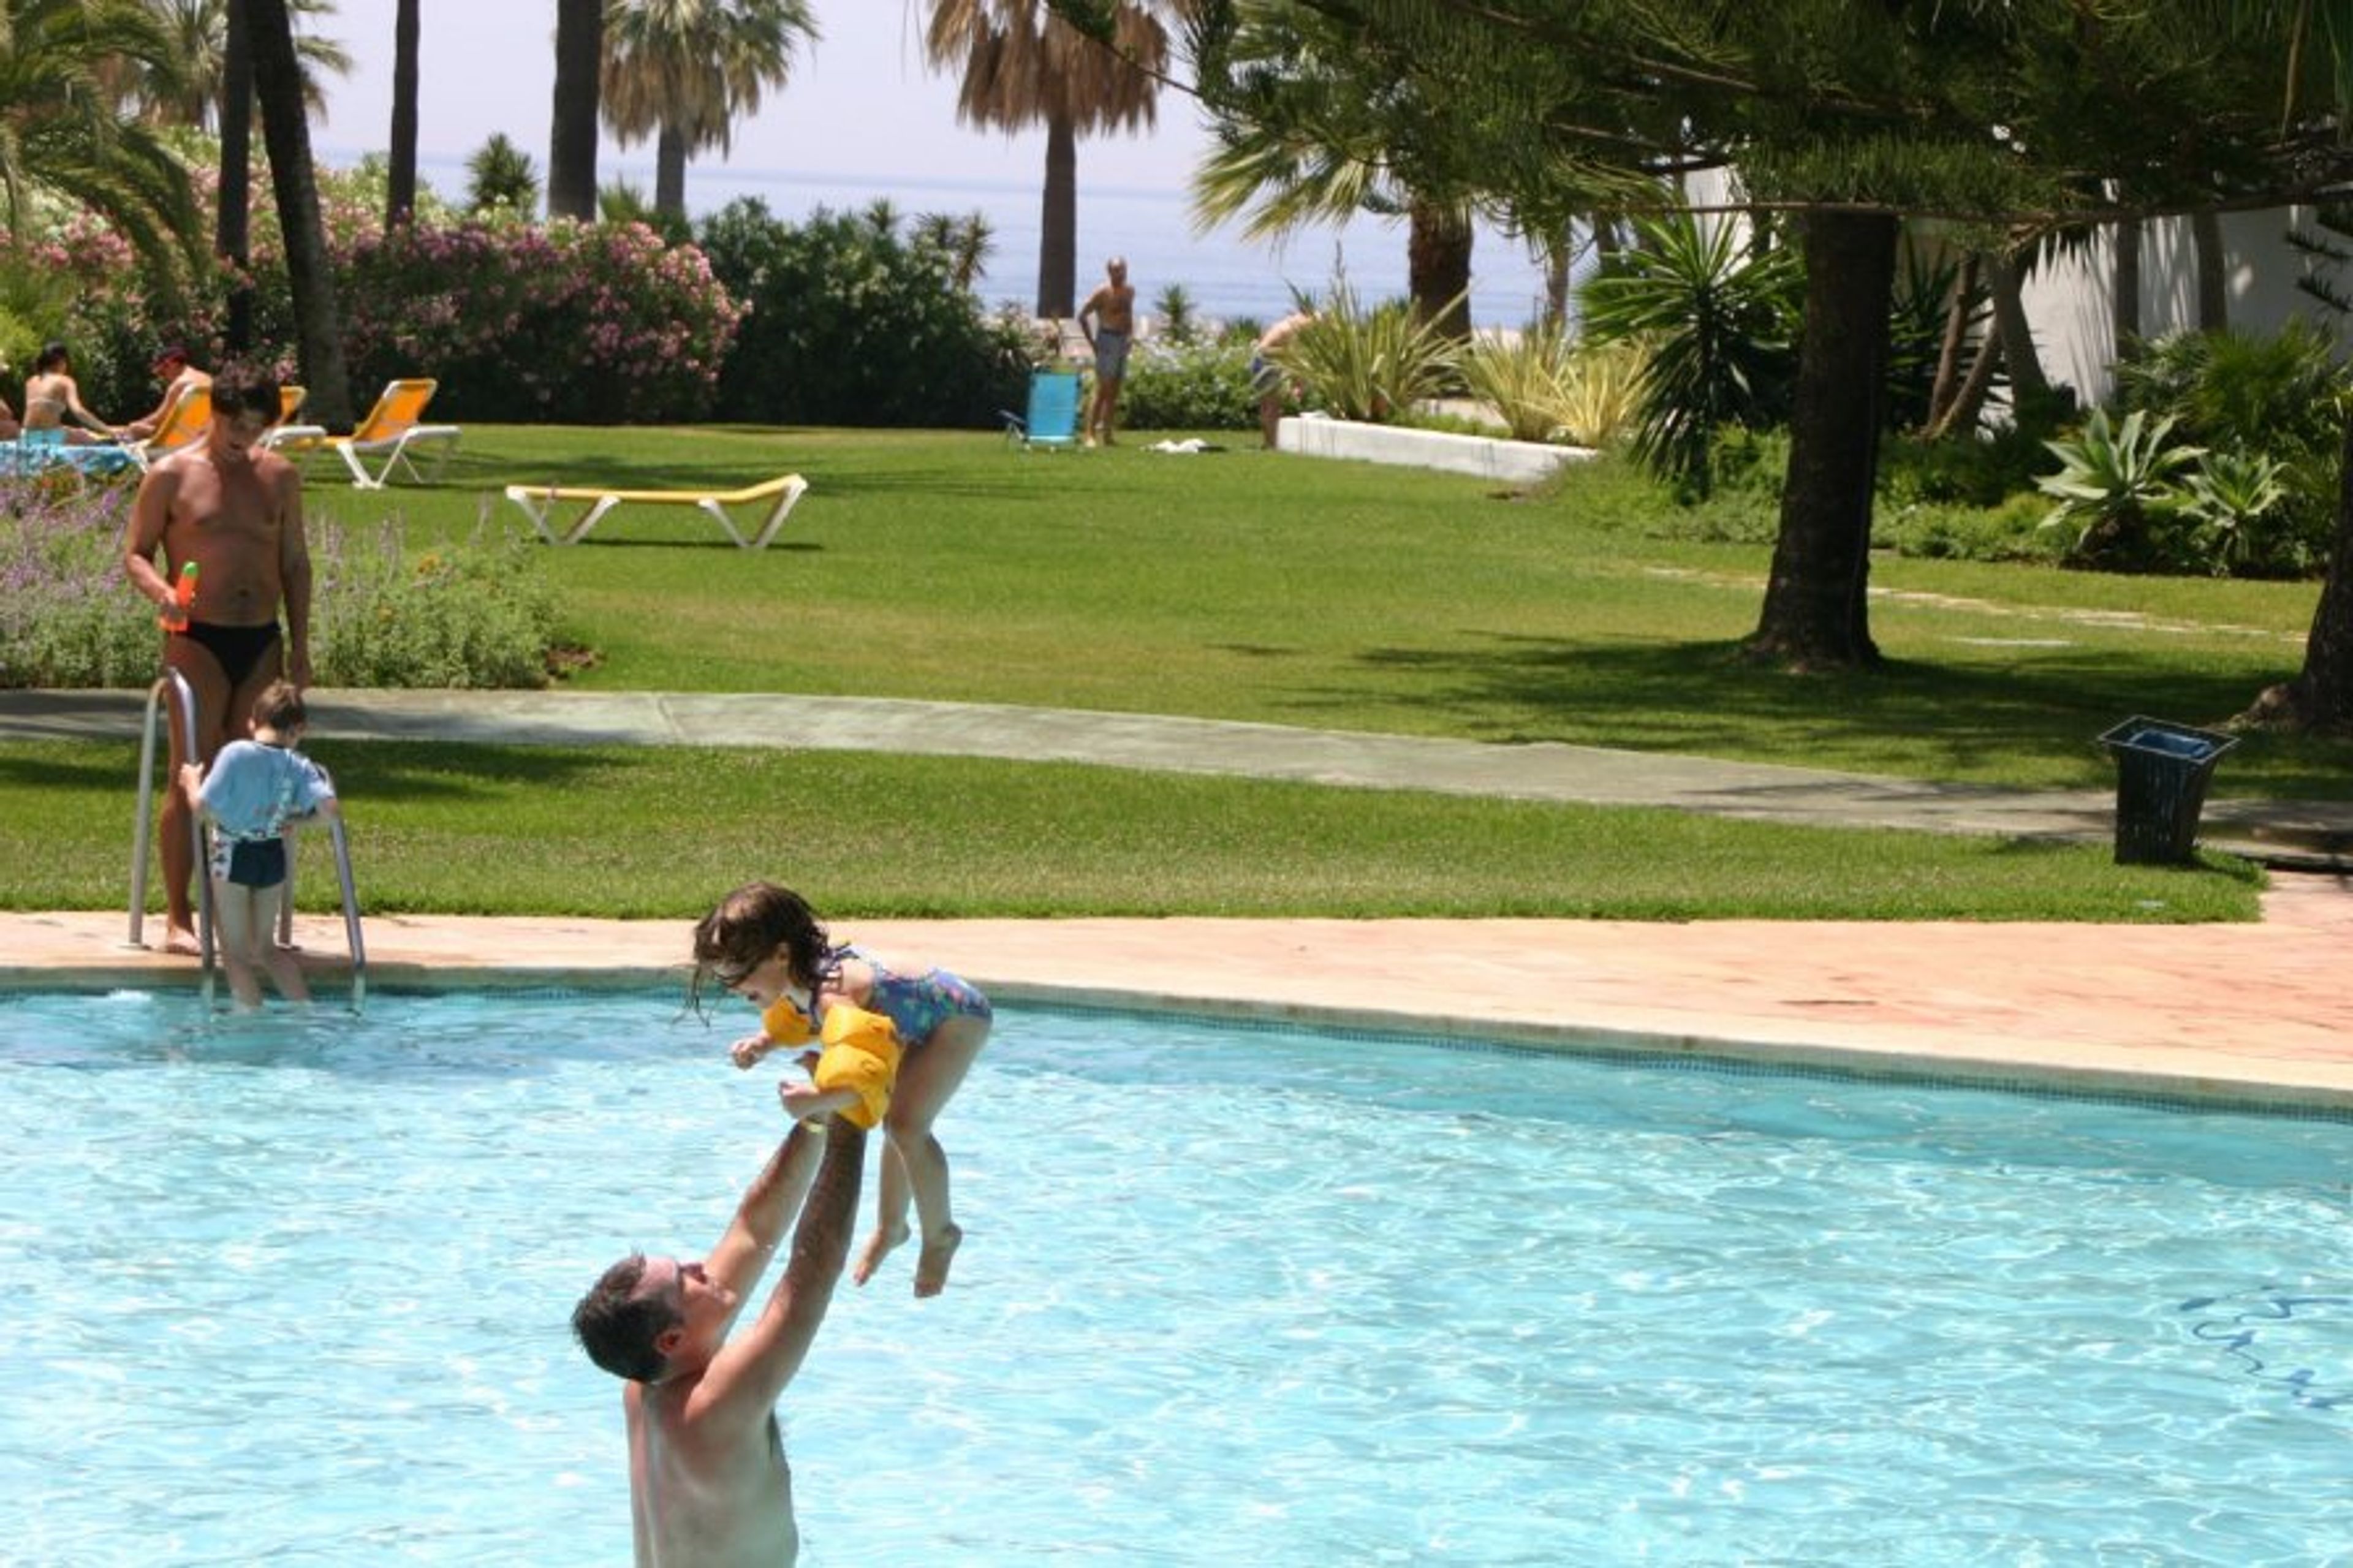 Family fun in 1 of 3 pools - the Mediterranean sea in the background